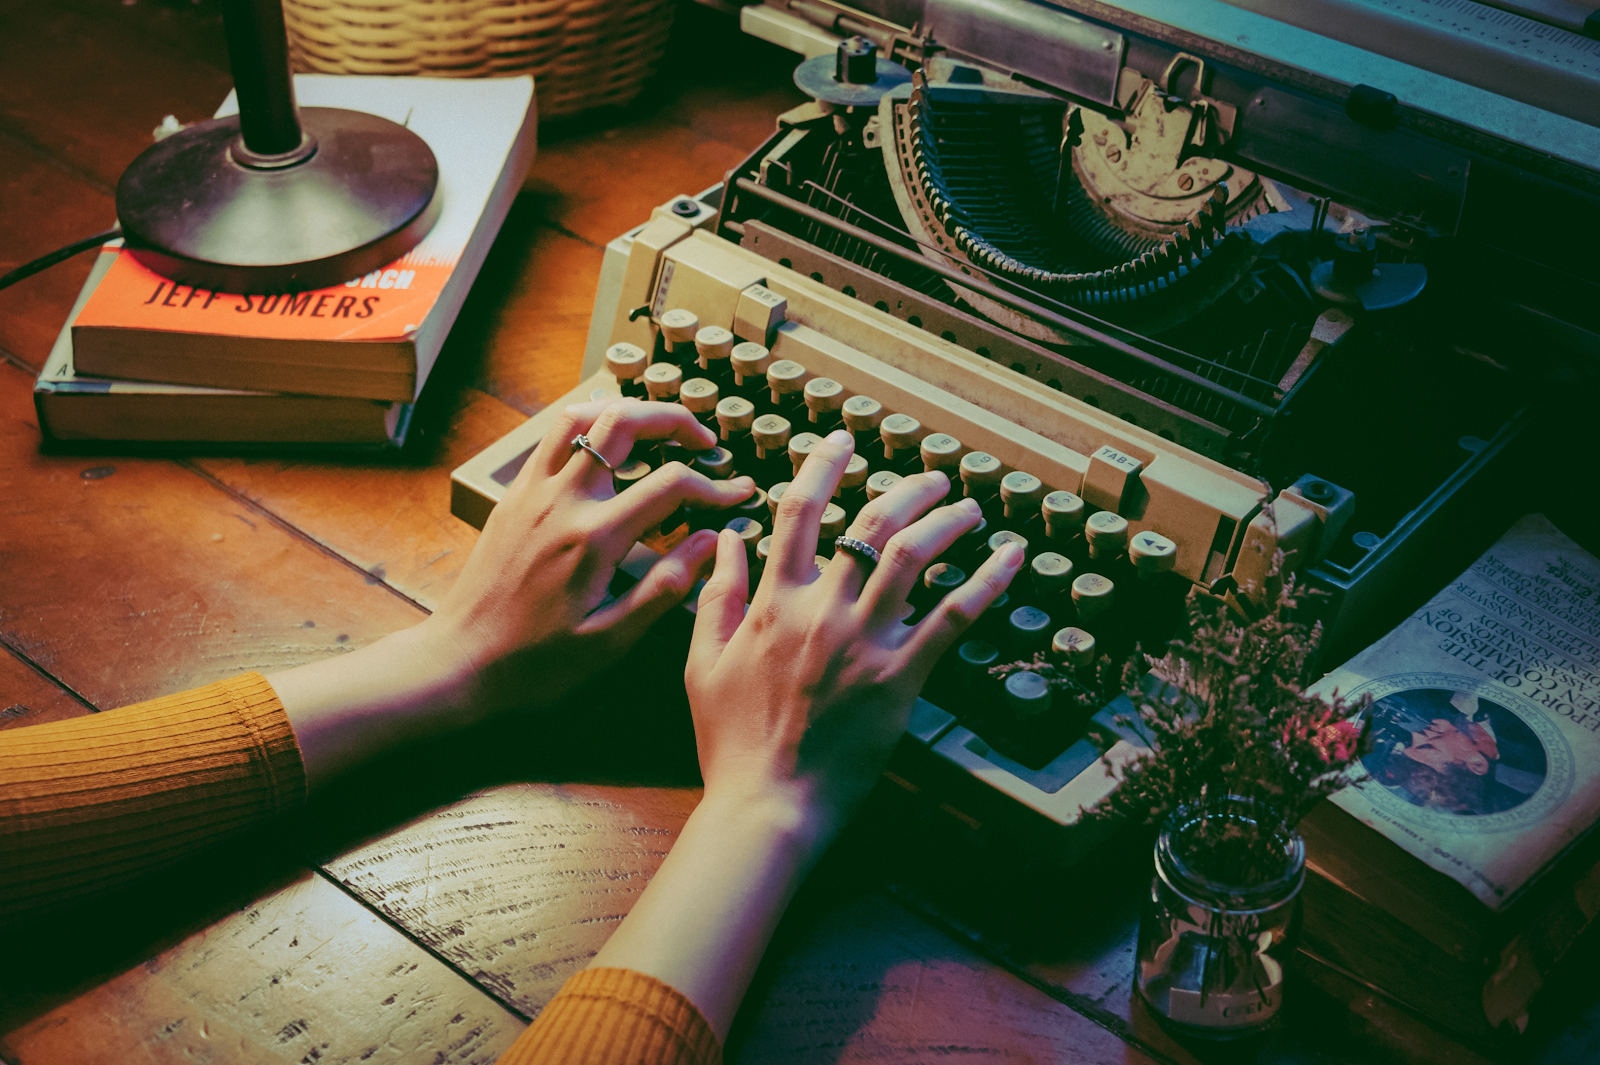 A photo of a woman's hands typing on an old typewriter.